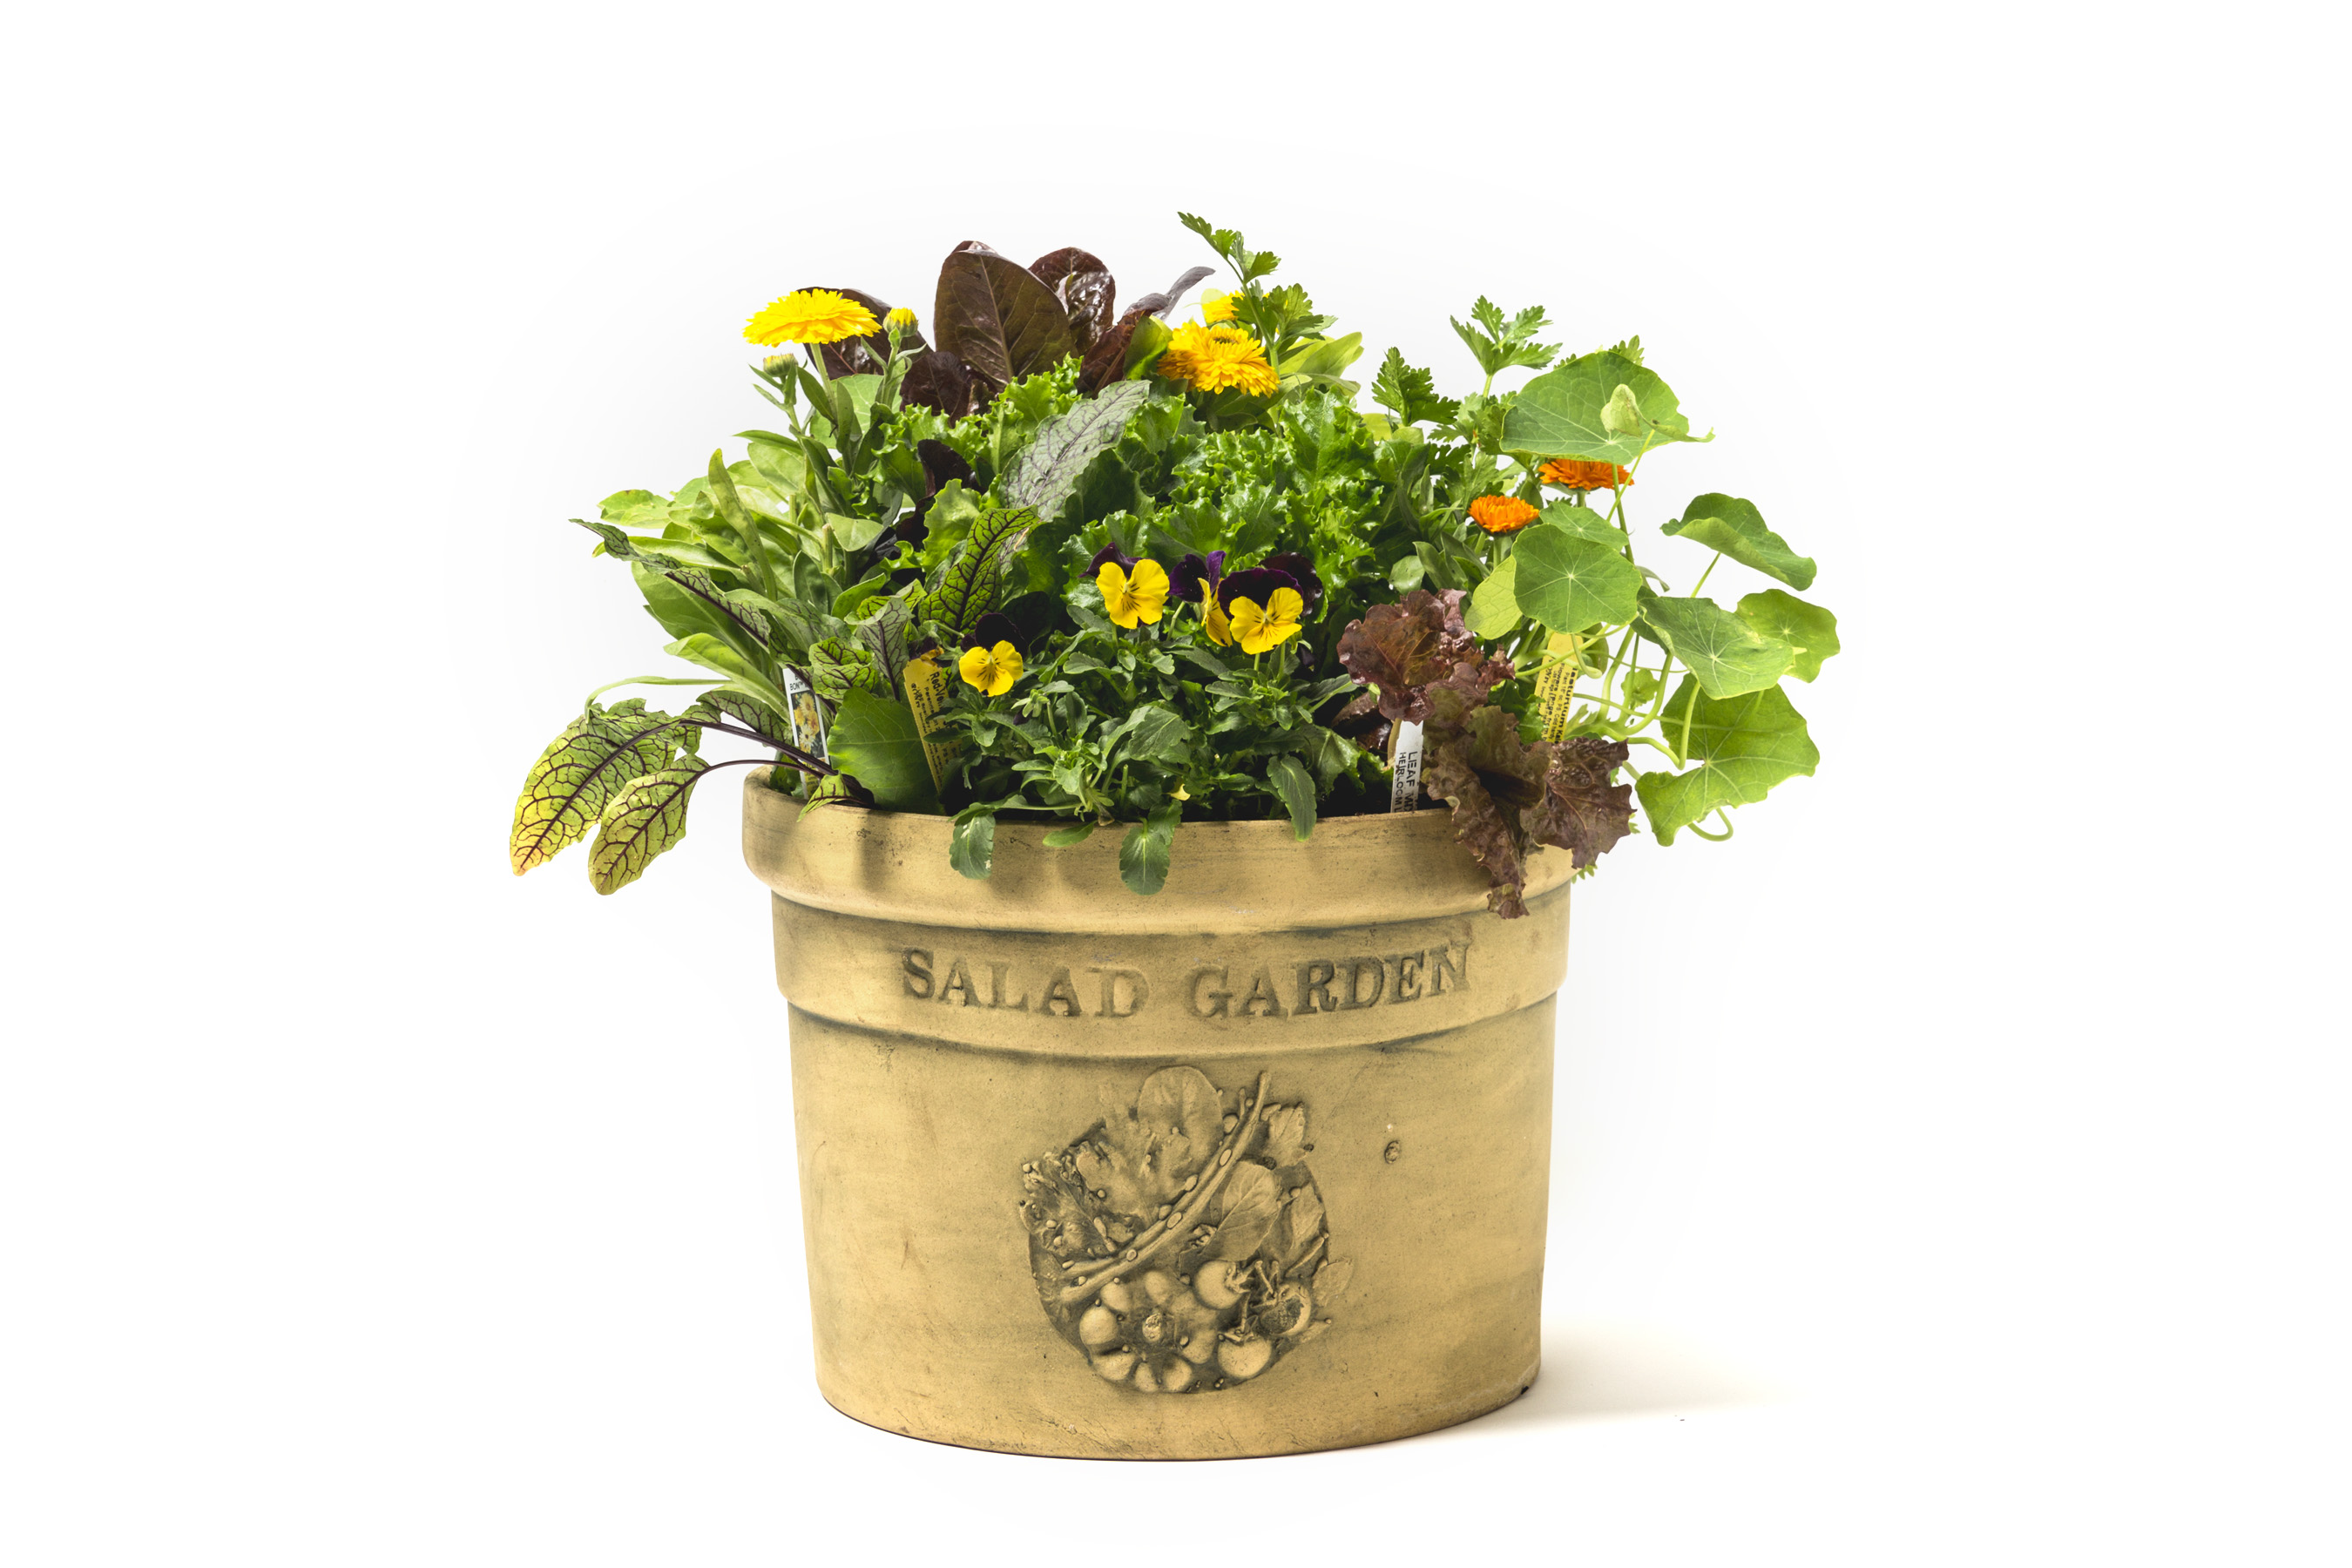 Salad garden in a container